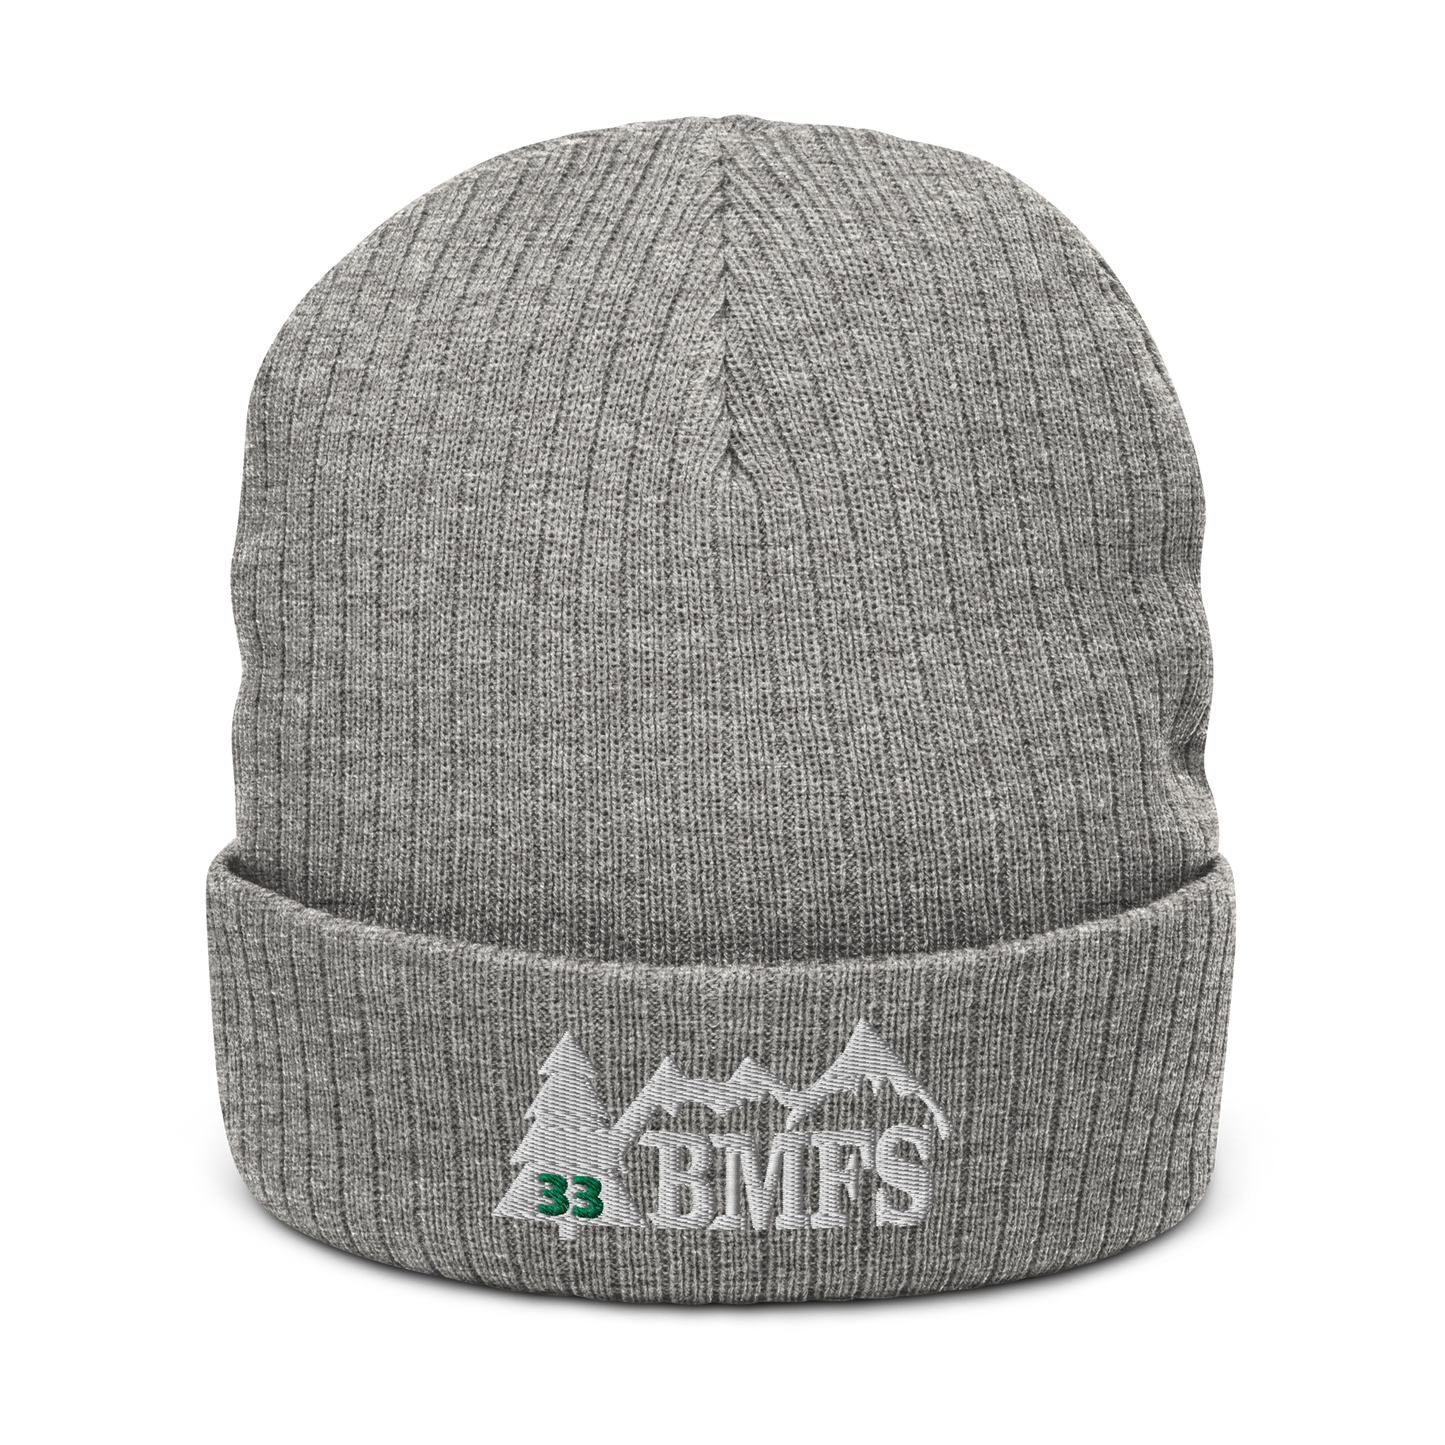 BMFS Tree Cuffed Beanie | Flat Embroidery | Ribbed | Inspired Billy Art